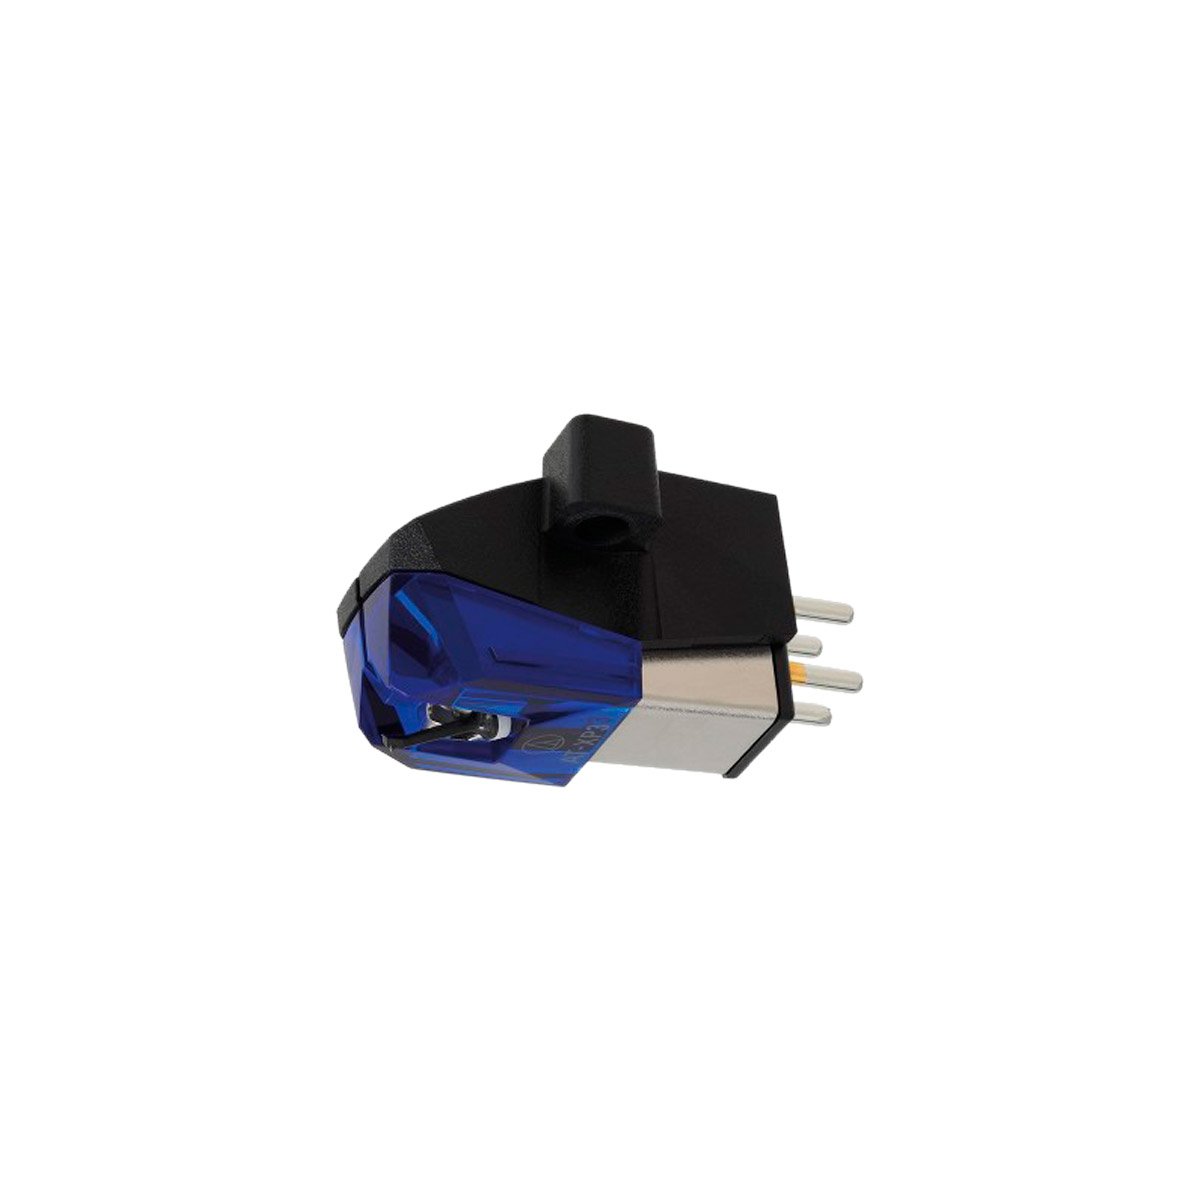 Turntable Accessories - Audio-Technica AT-XP3 Moving Magnet DJ Cartridge